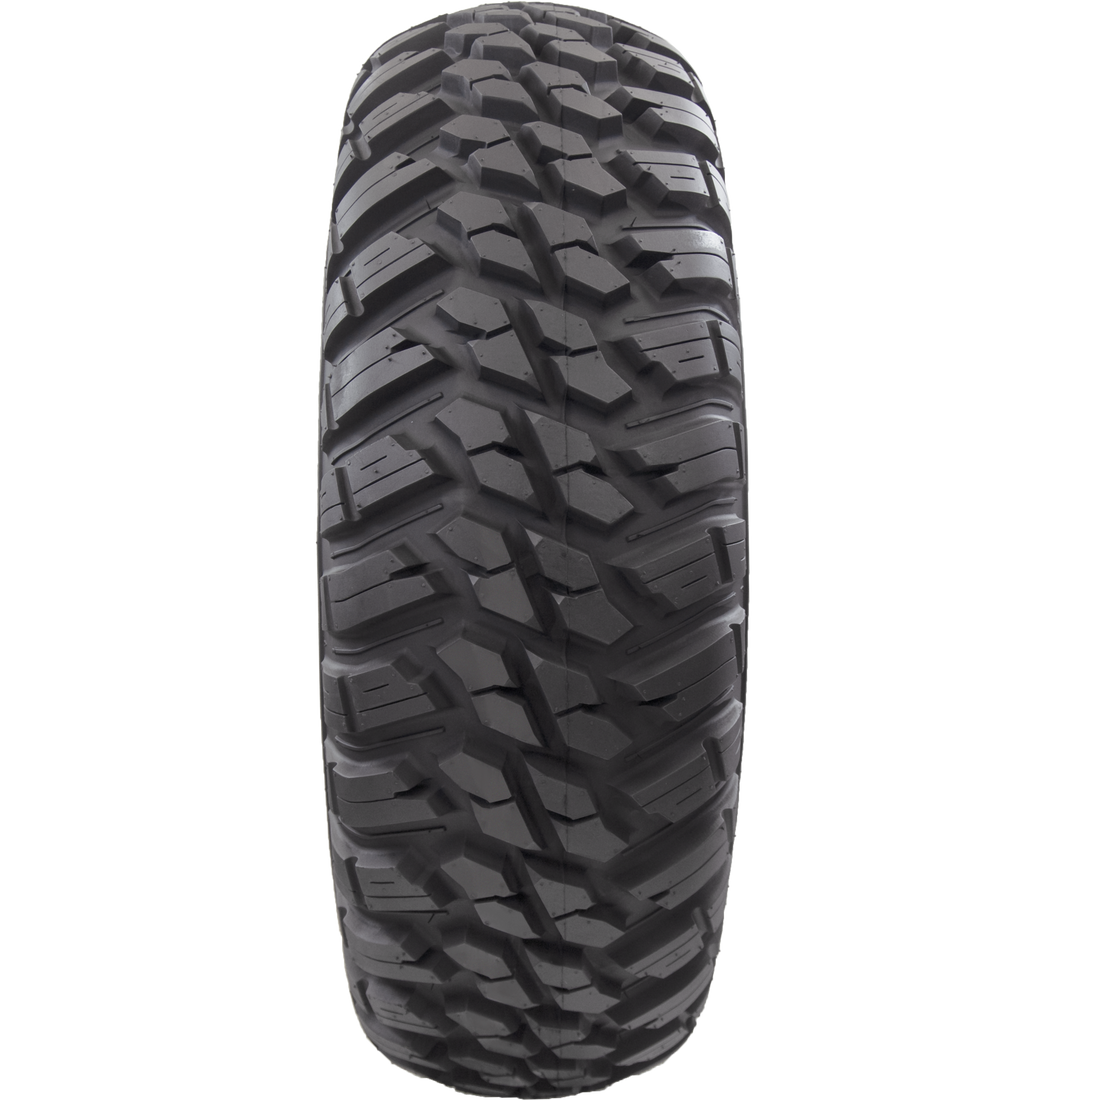 Full frontal view of Mongrel ATV/UTV tire revealing its full coverage tread pattern, offering unparalleled traction and stability across diverse landscapes.